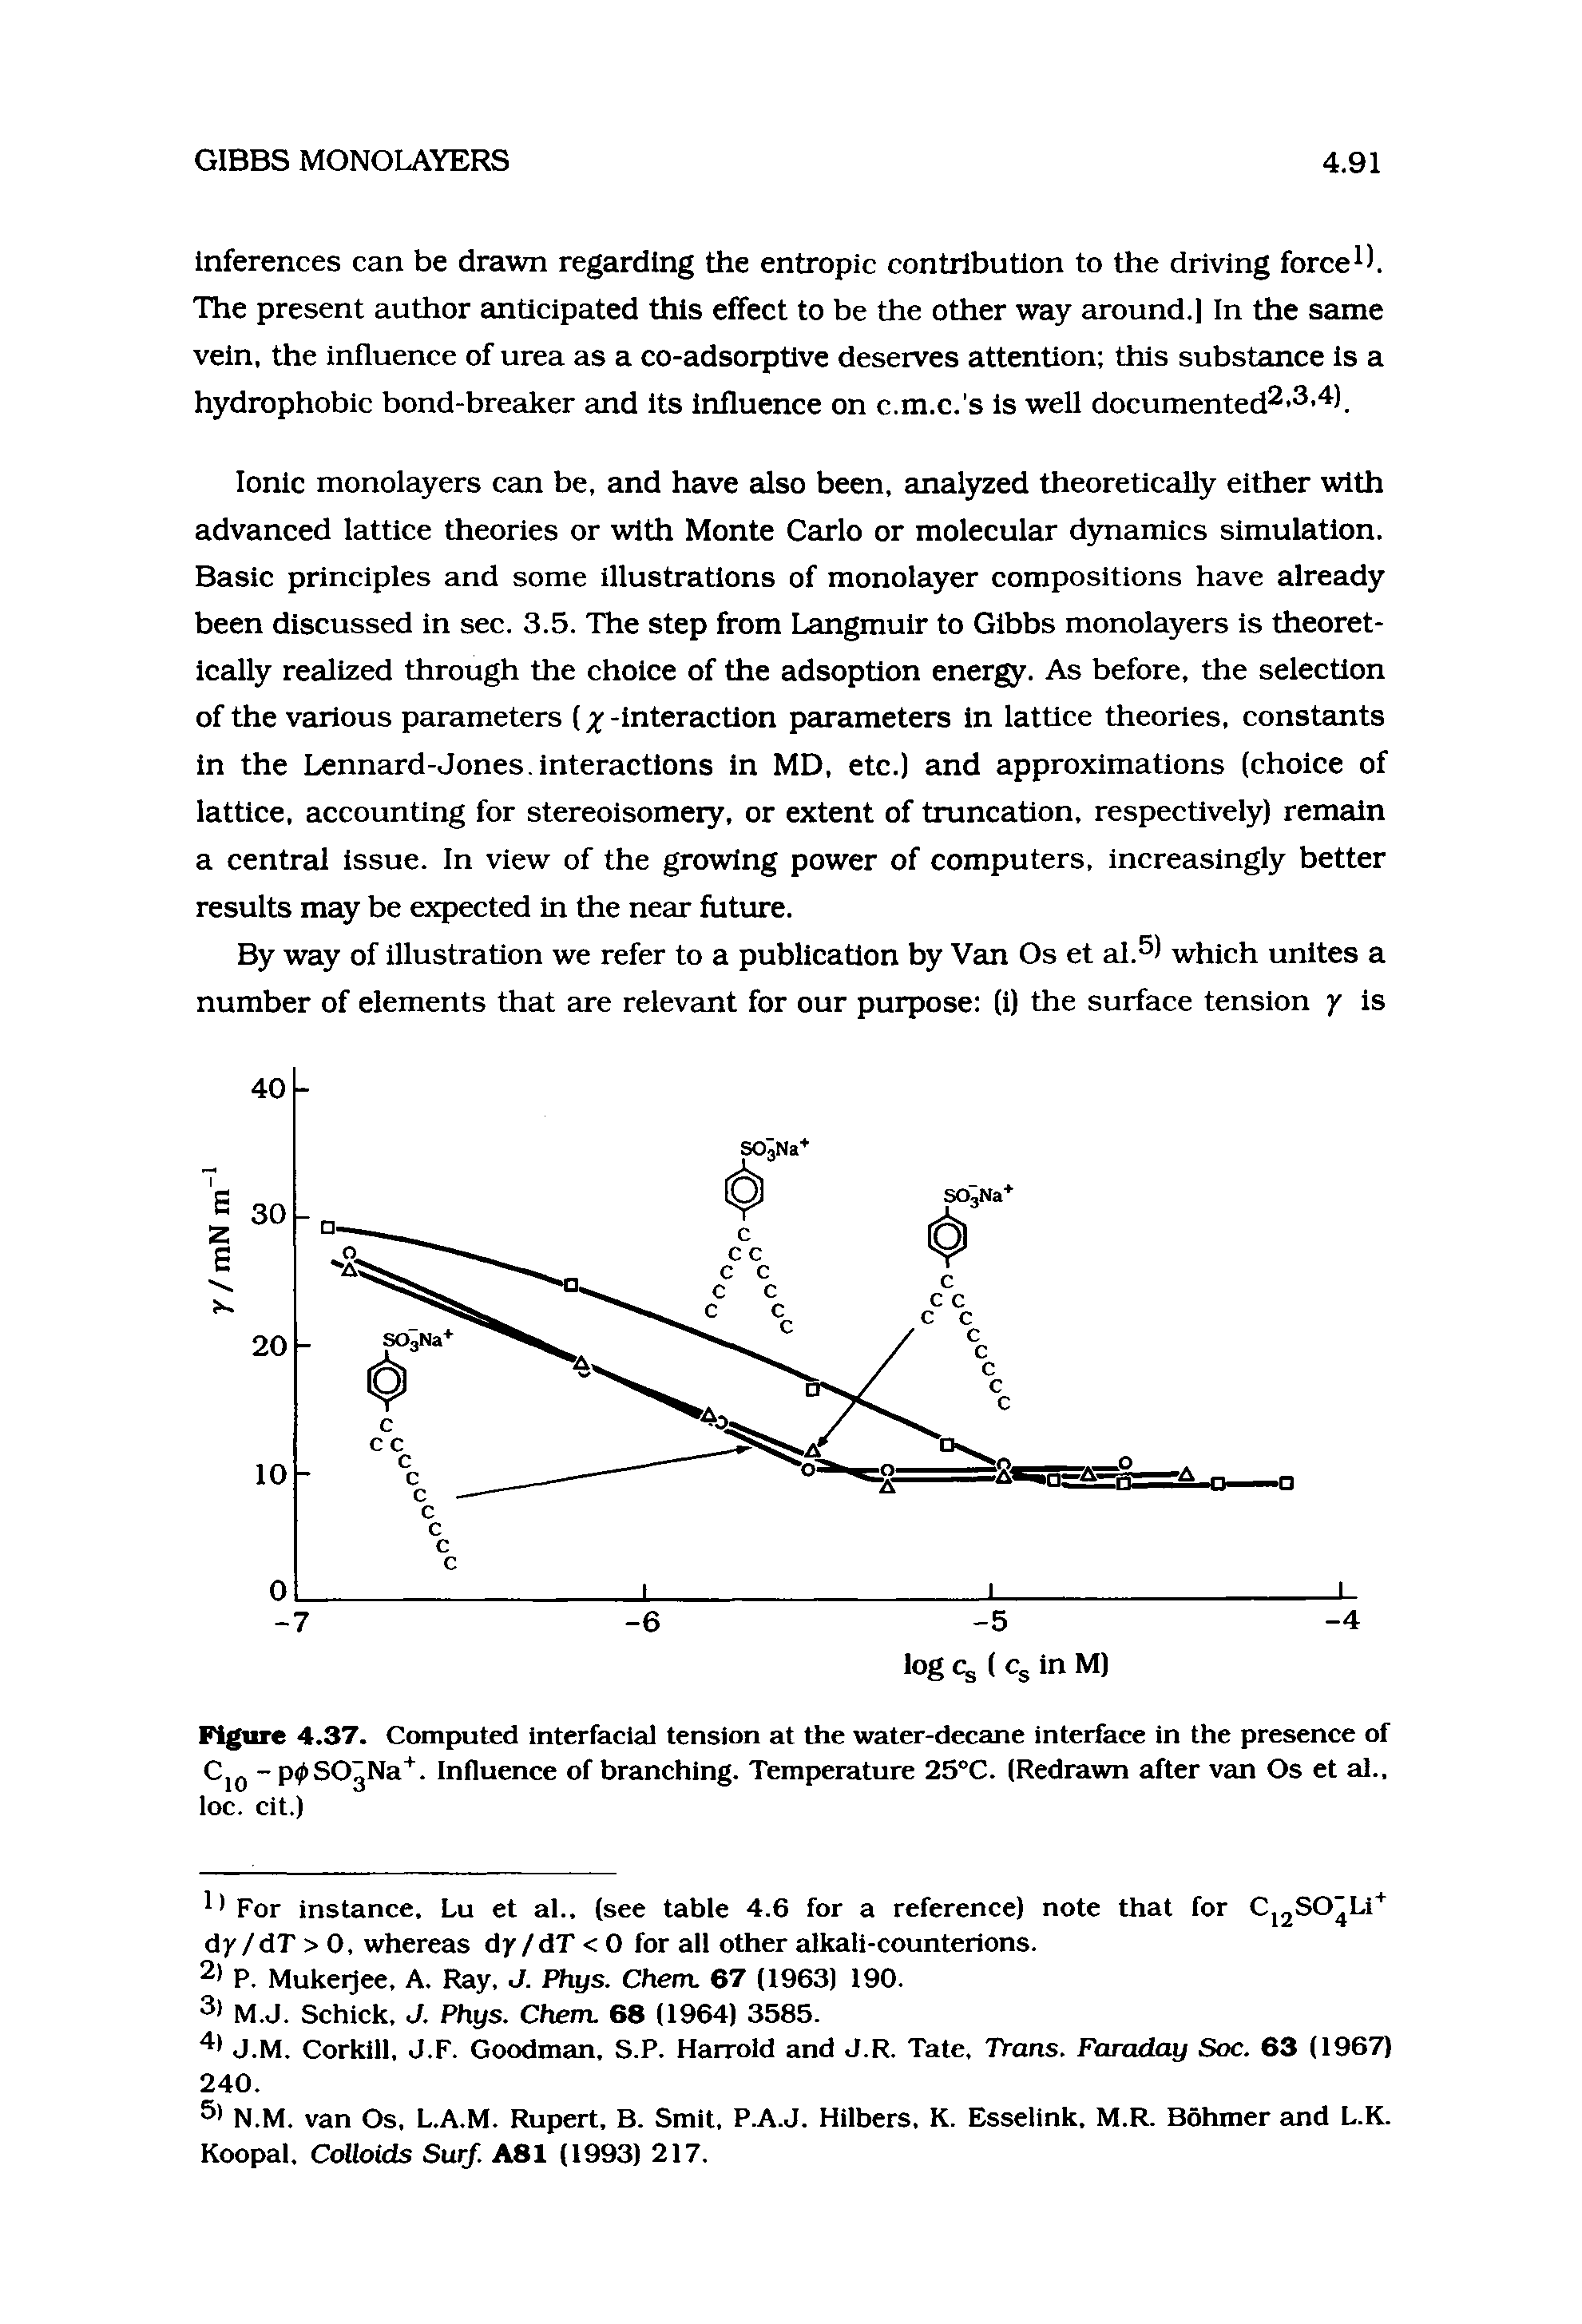 Figure 4.37. Computed interfaciai tension at the water-decane interface in the presence of CjQ - p SOgNa". Influence of branching. Temperature 25 C. (Redrawn after van Os et al., loc. cit.)...